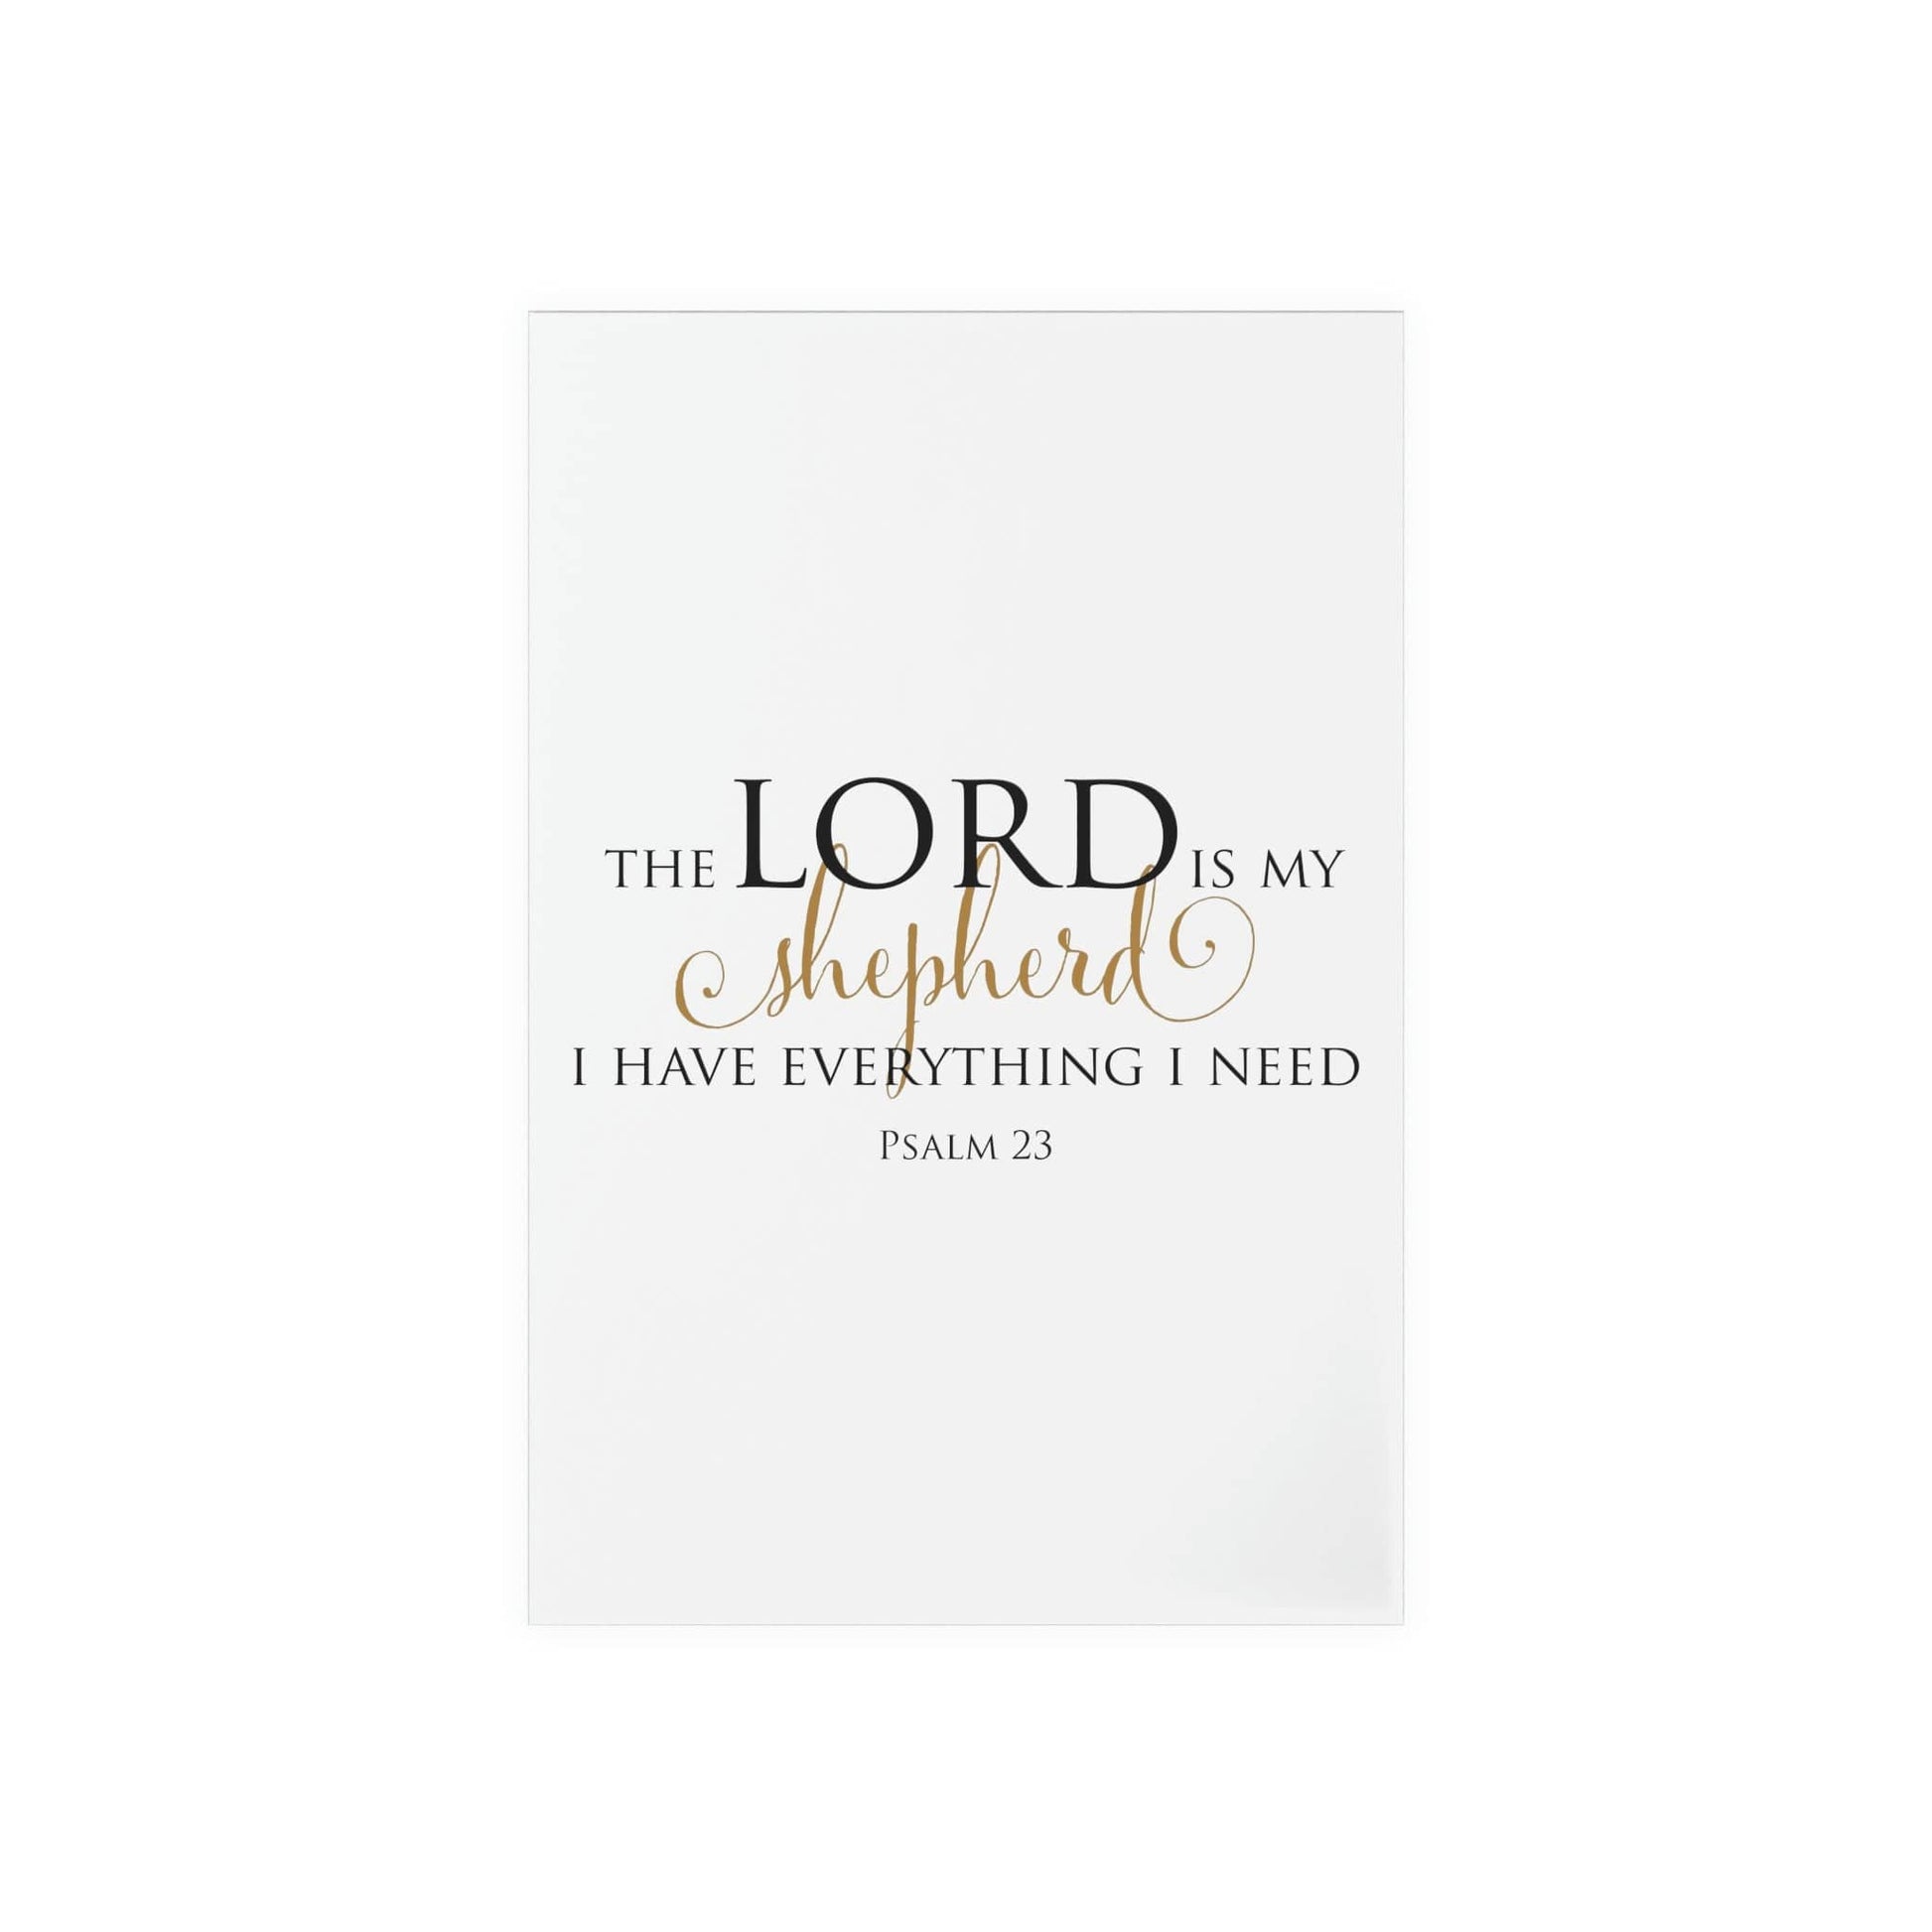 The Lord is My Shepherd Acrylic Sign with Wooden Stand Home Decor Printify 7.9"  x 11.8"  